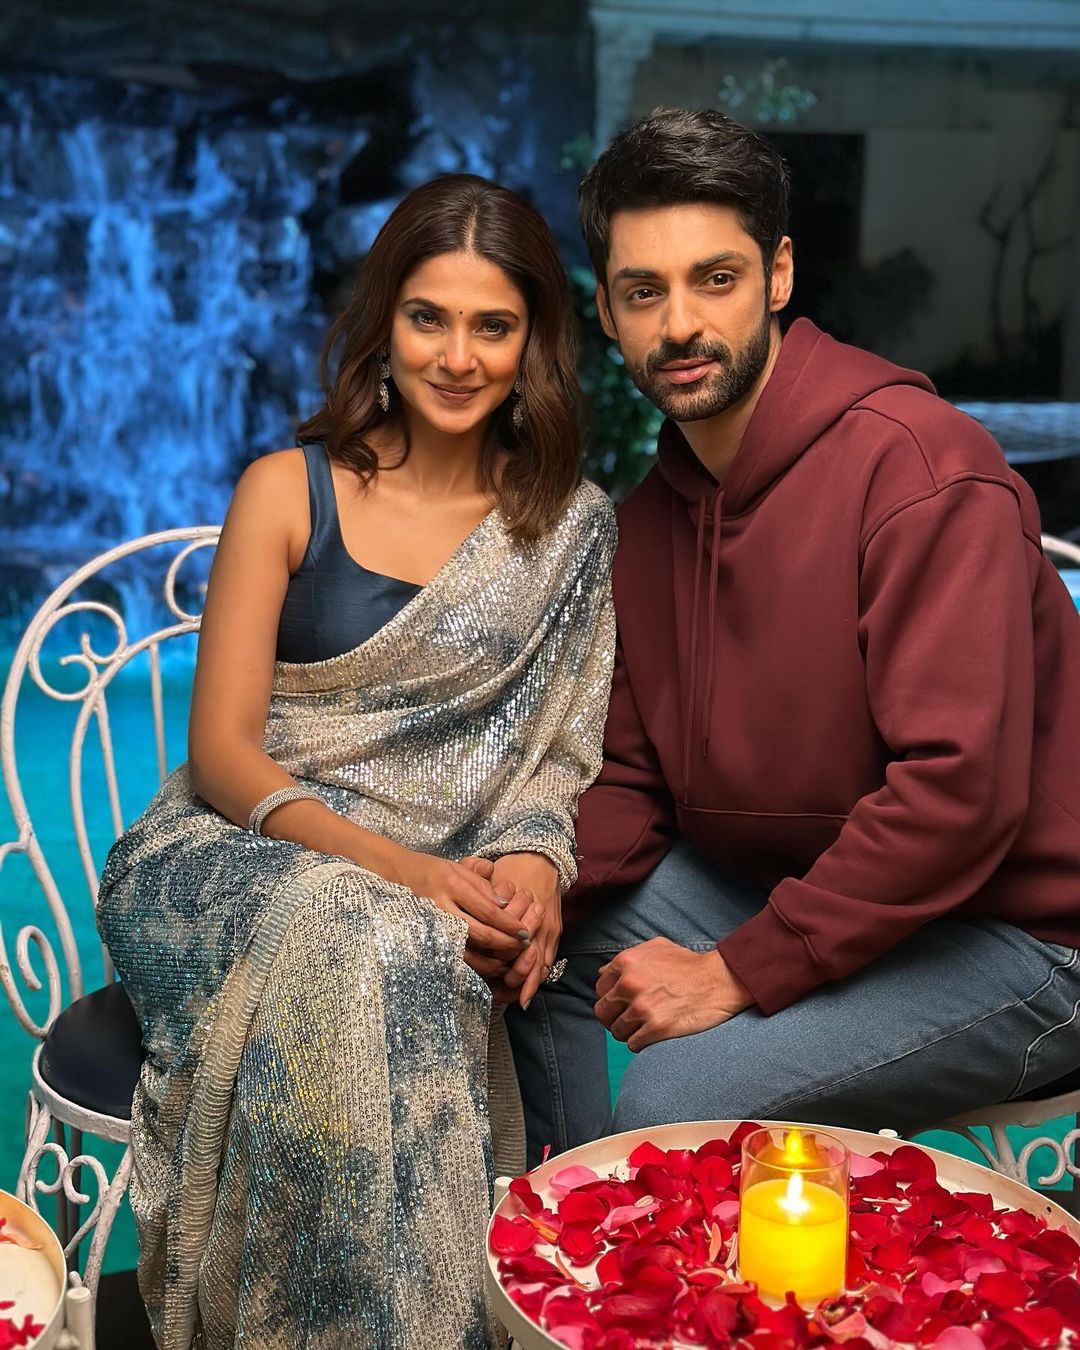 Cherishes Moments! Raisinghani Vs Raisinghani Fame Jennifer Winget Spends Quality Time With A Friend. Find Out Who It Is!